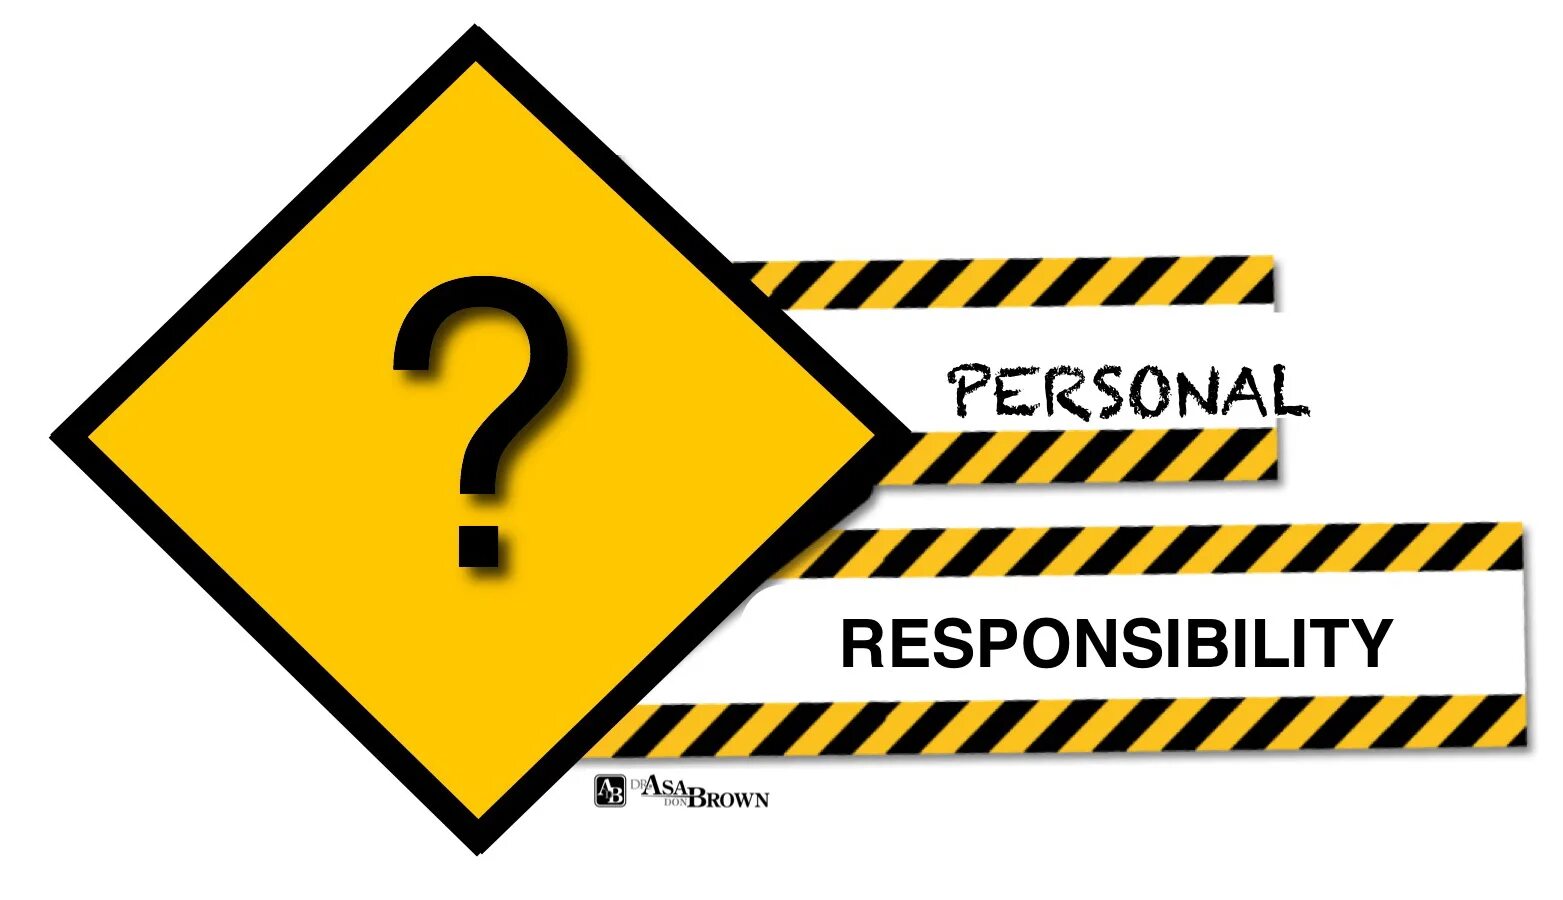 Personal responsibility. All responsibility. Responsible person pictures. Responsible person